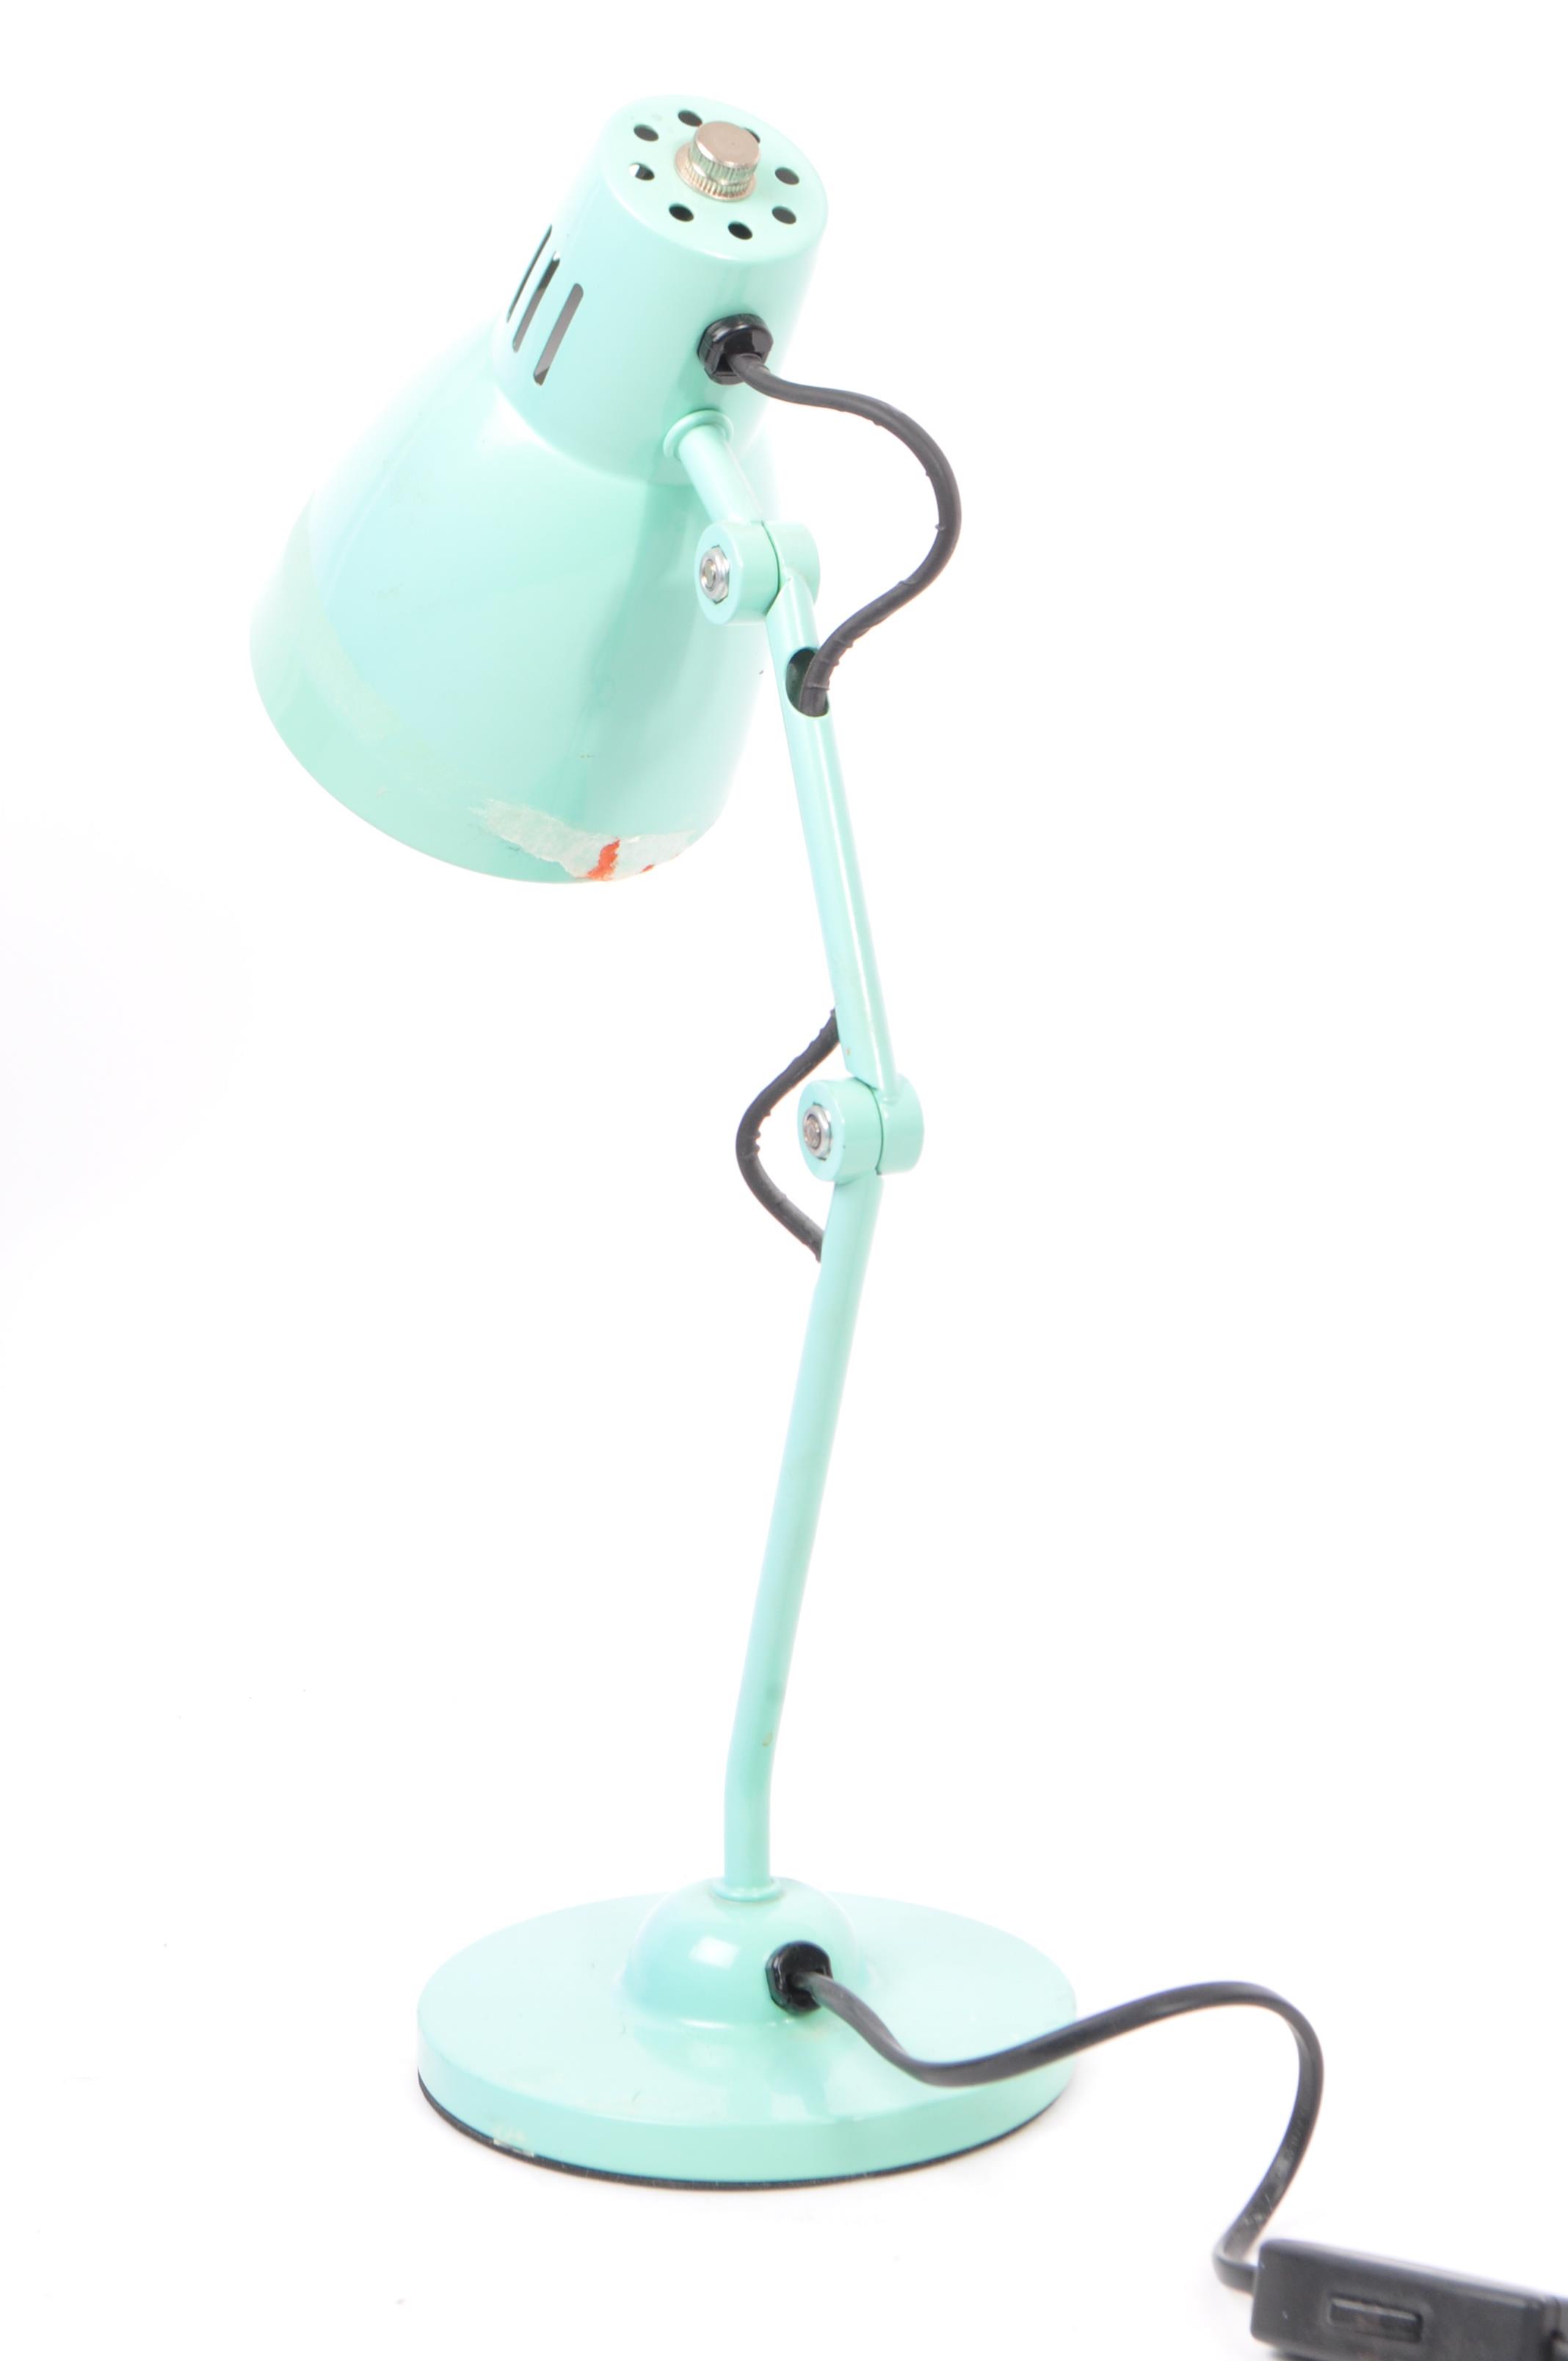 CONTEMPORARY TURQUOISE INDUSTRIAL DESK LAMP - Image 4 of 5